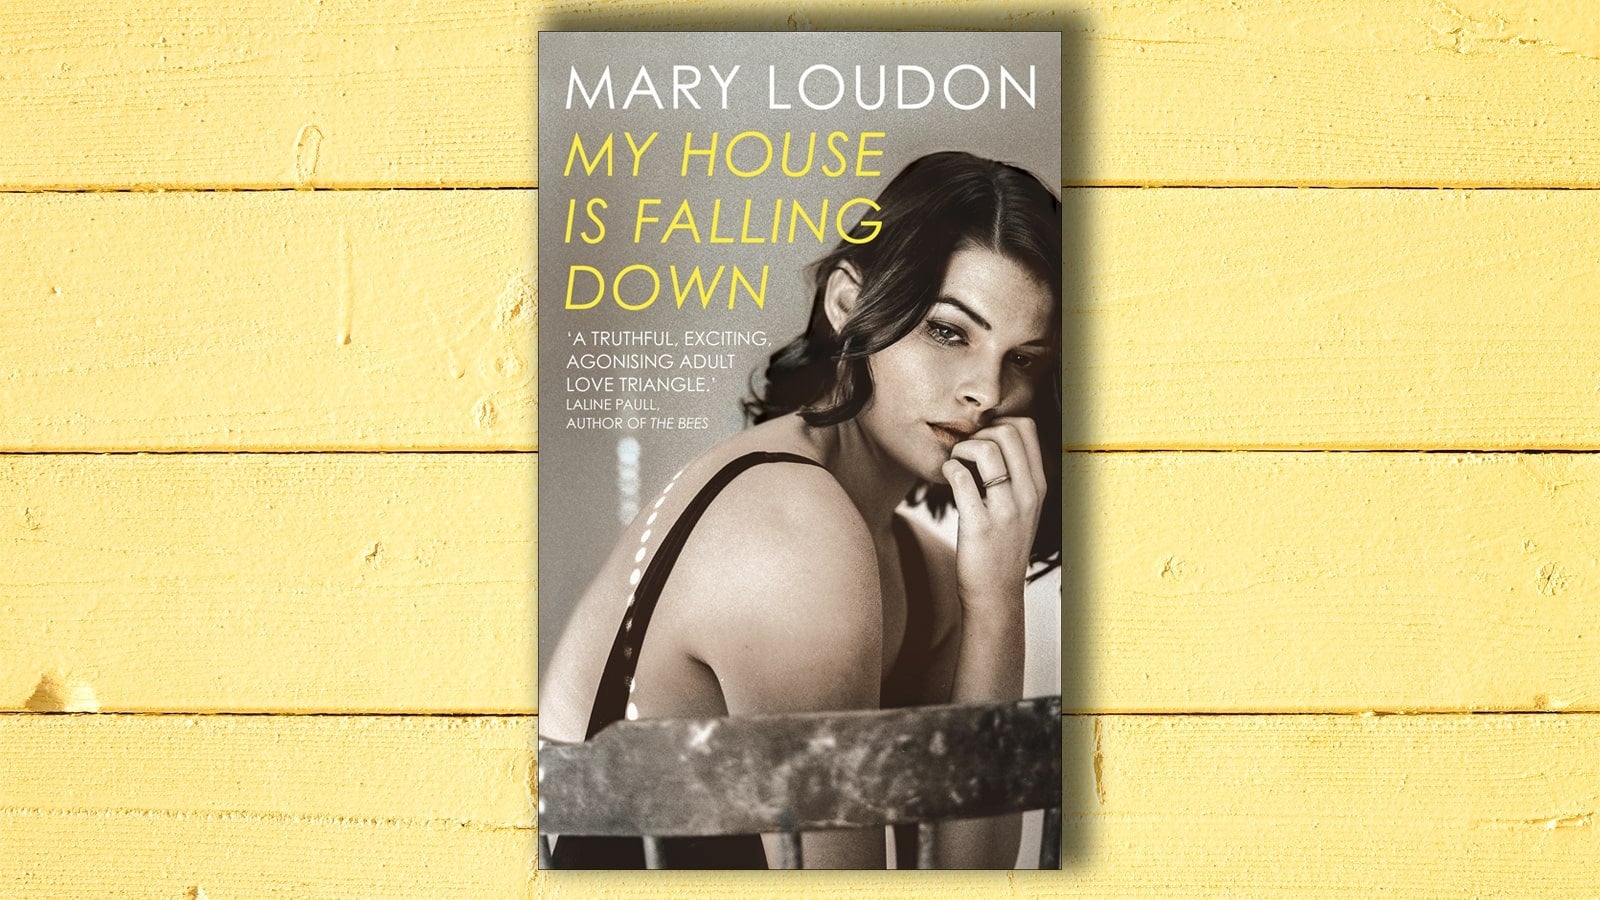 My House is Falling Down book cover on yellow background